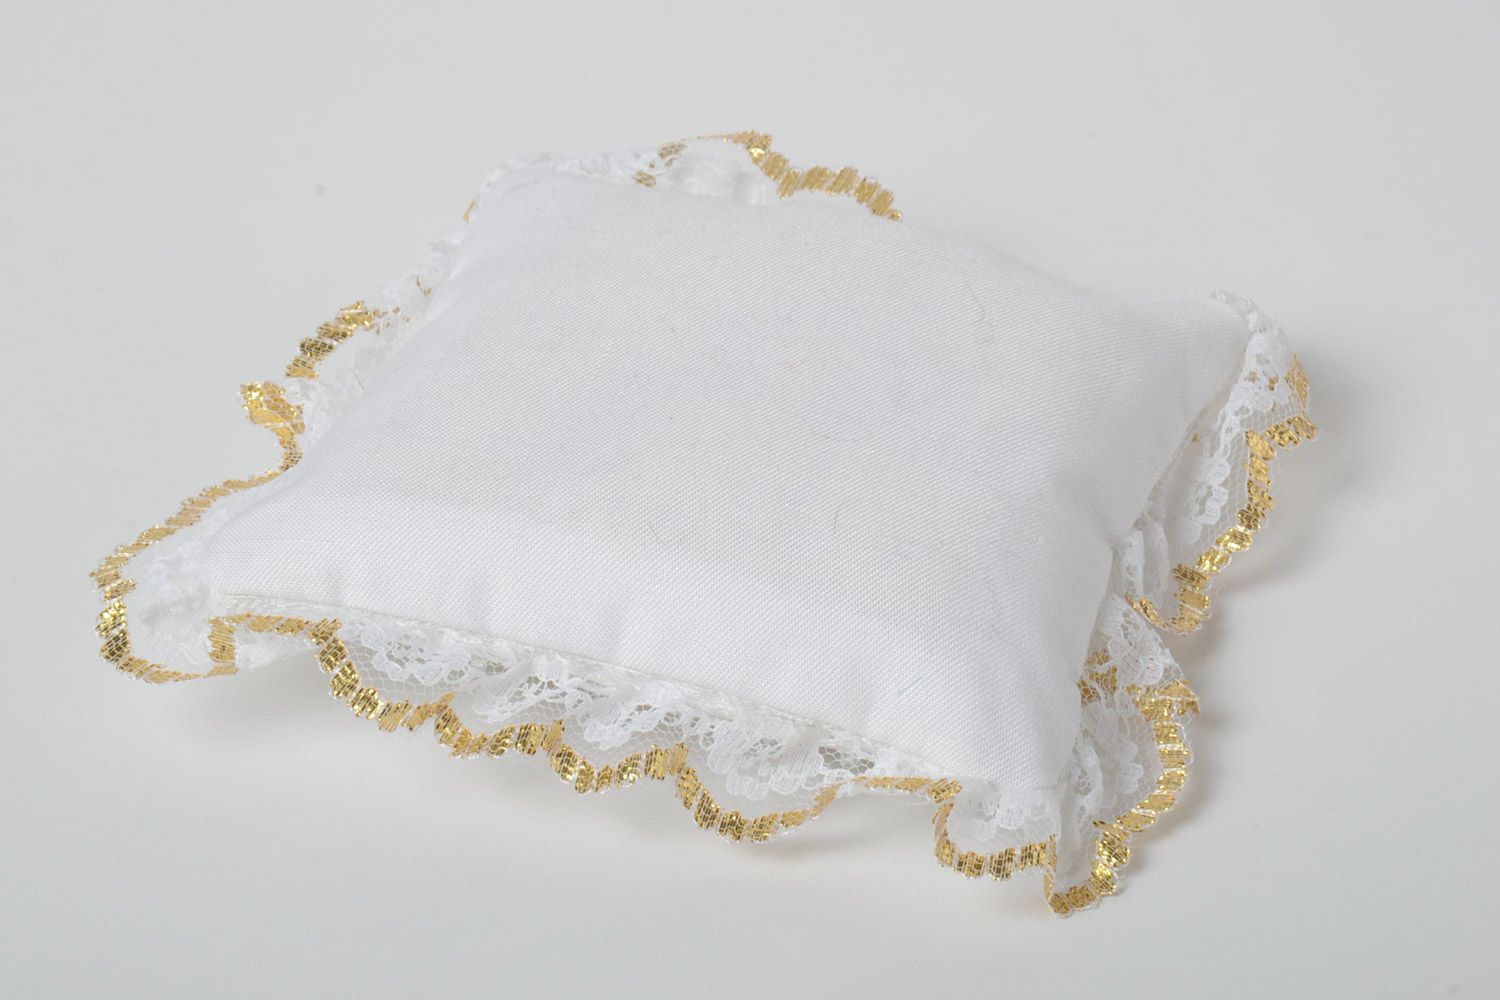 Handmade festive wedding rings pillow sewn of satin with lace and Czech beads photo 4